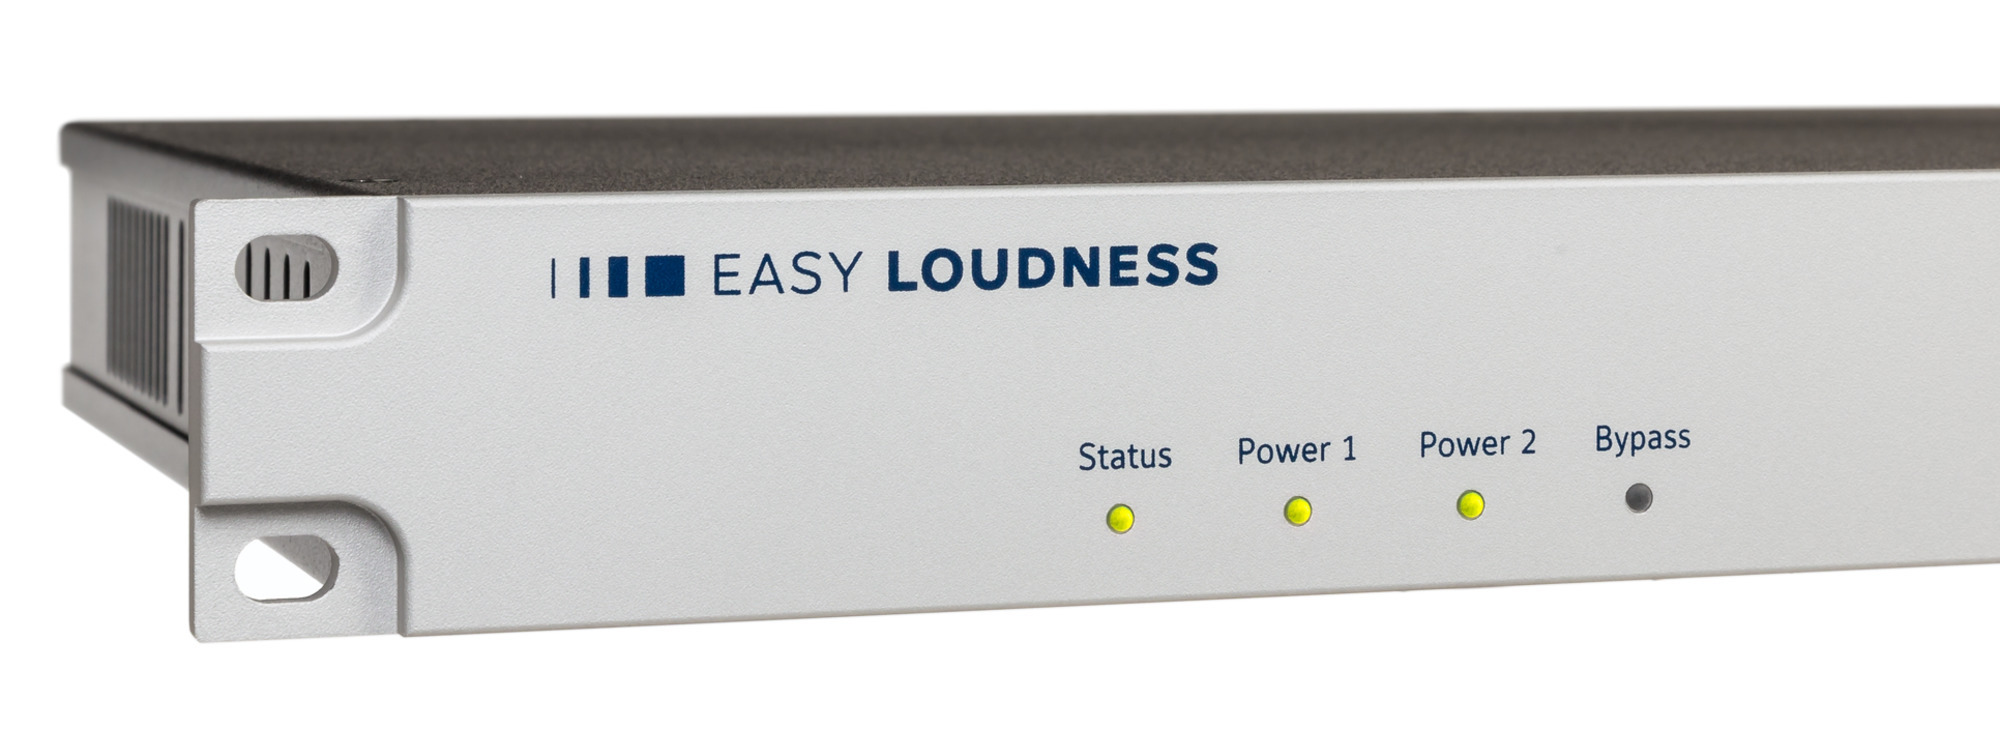 Easy Loudness